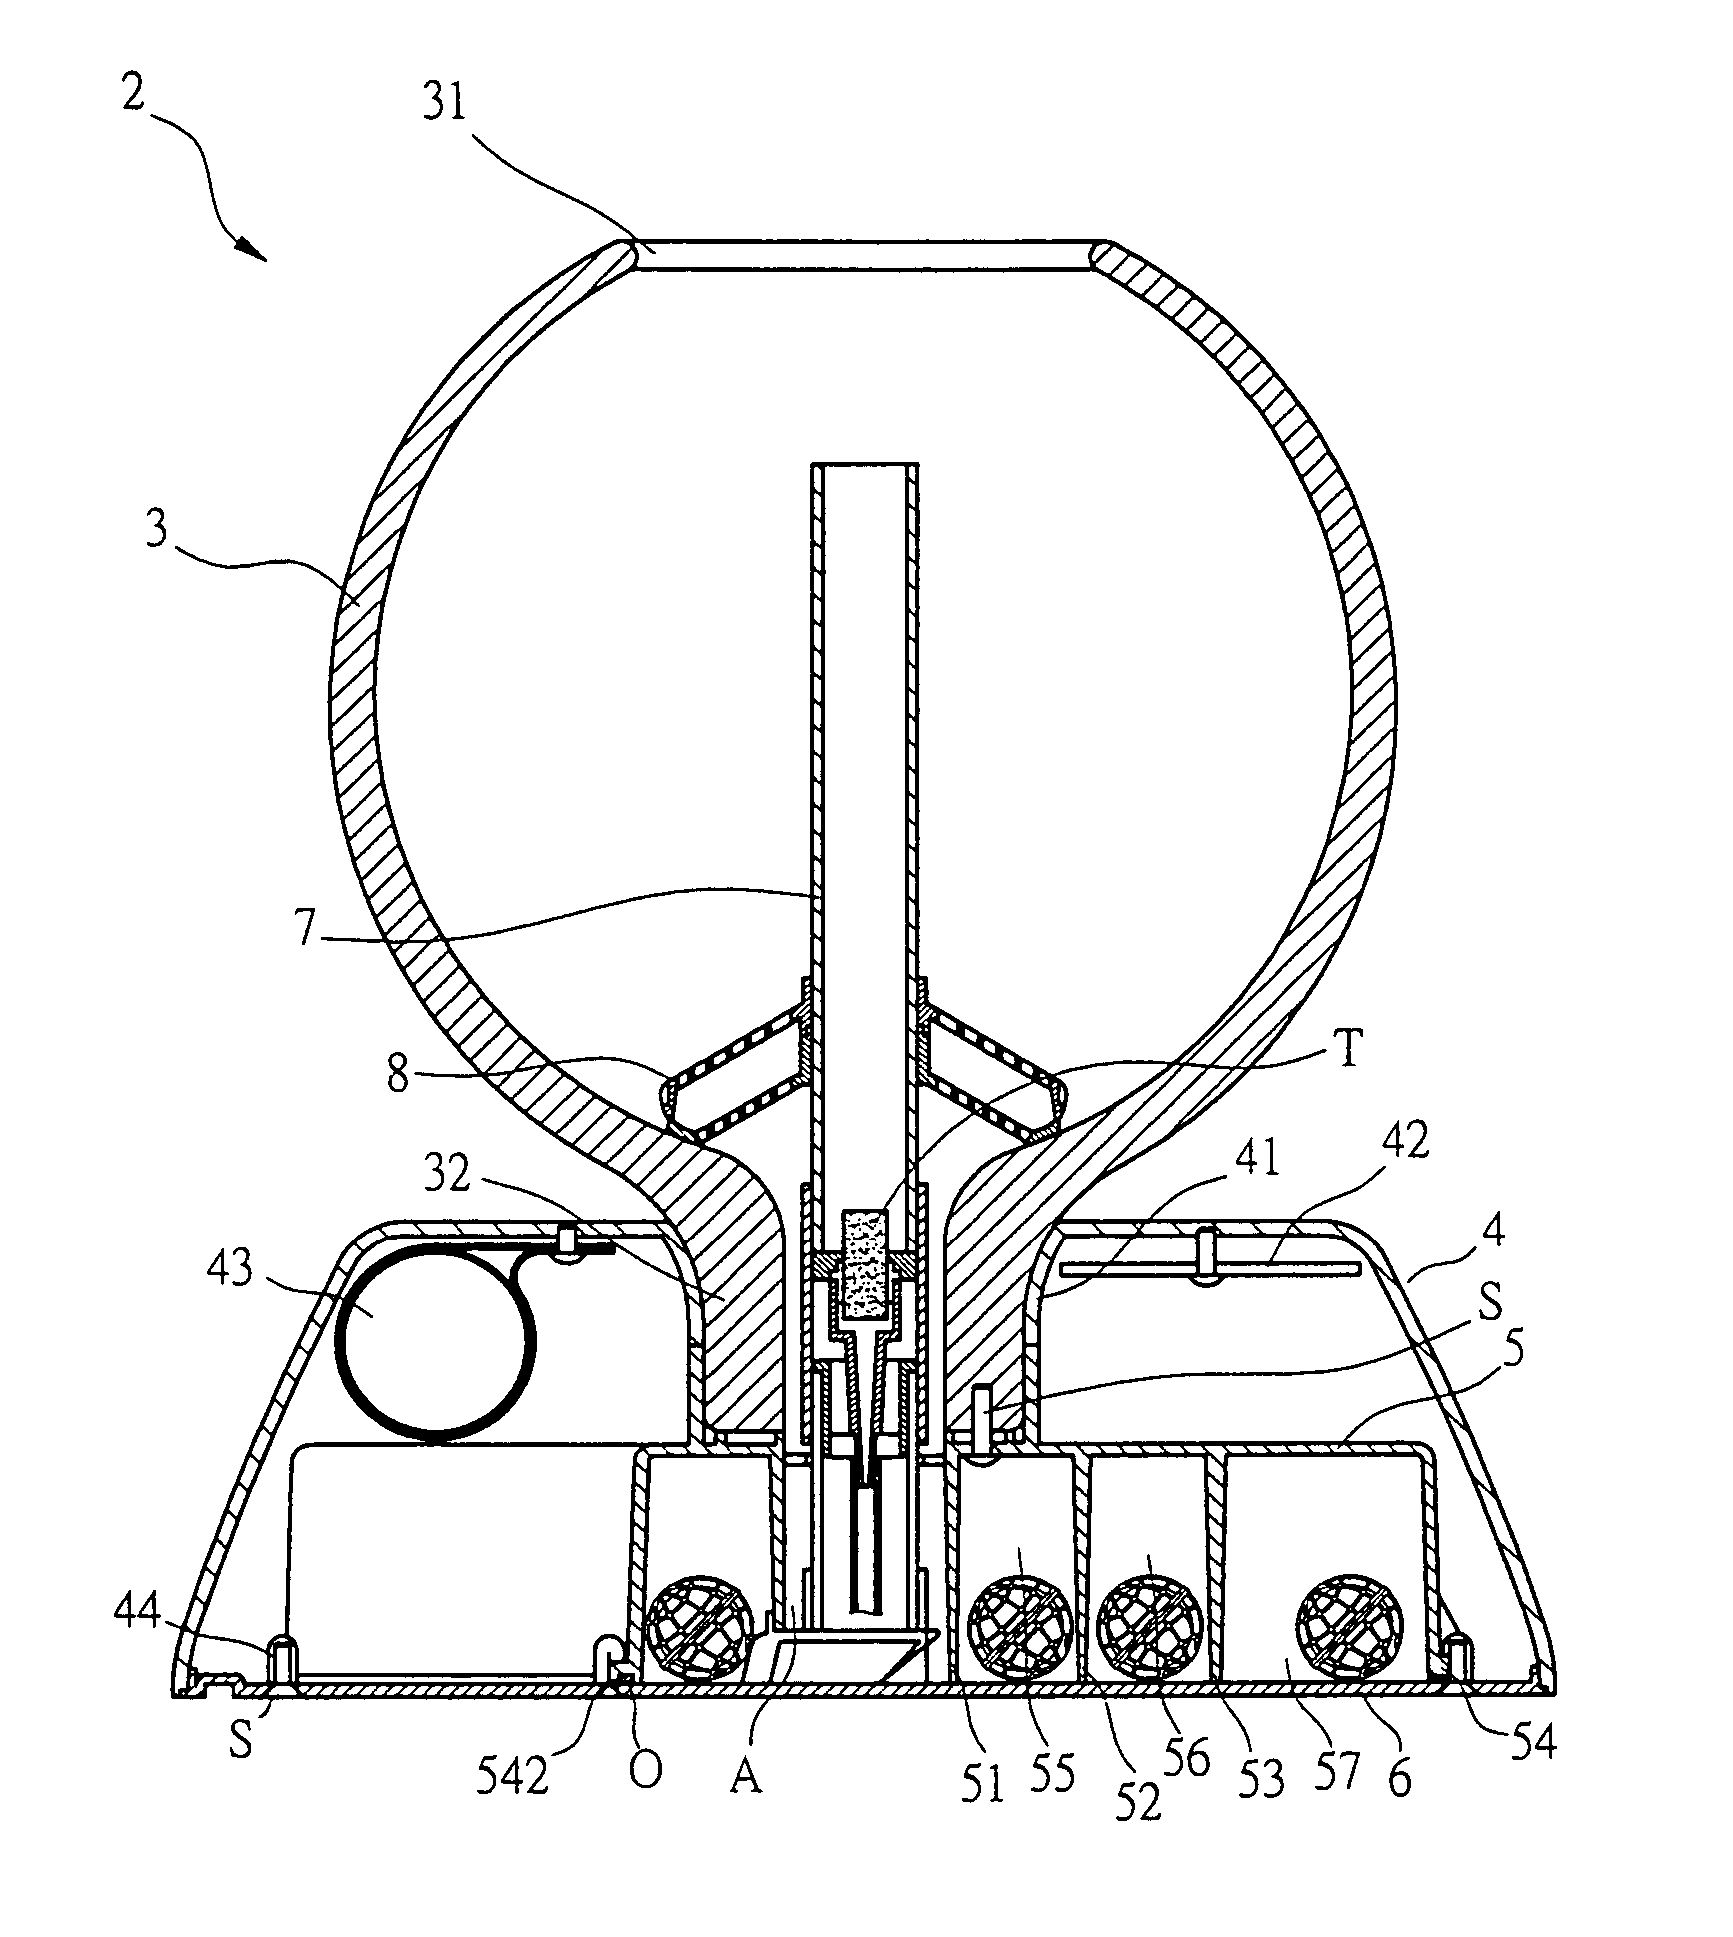 Aquarium device with enhanced water filtration